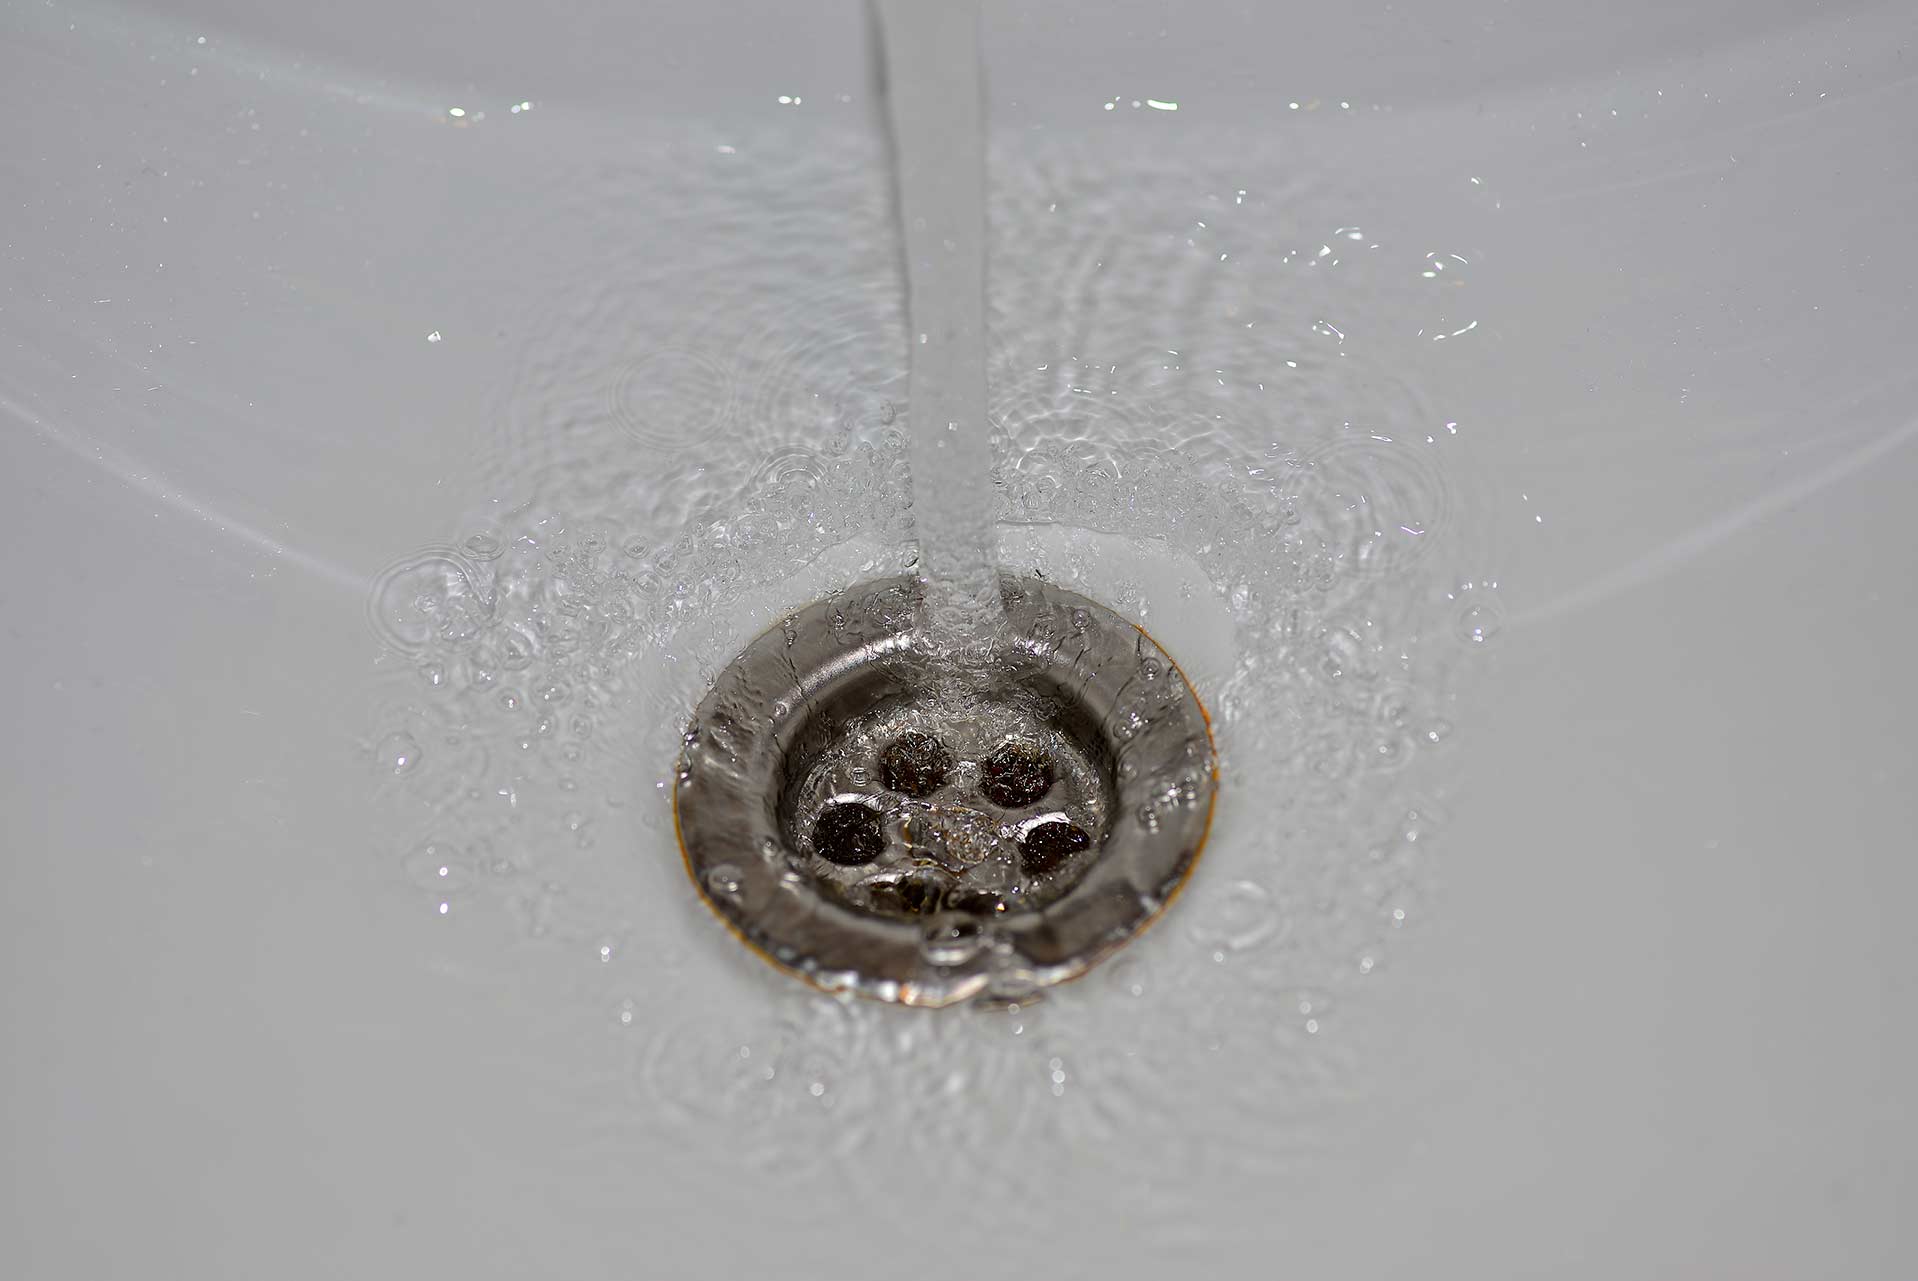 A2B Drains provides services to unblock blocked sinks and drains for properties in Hillingdon.